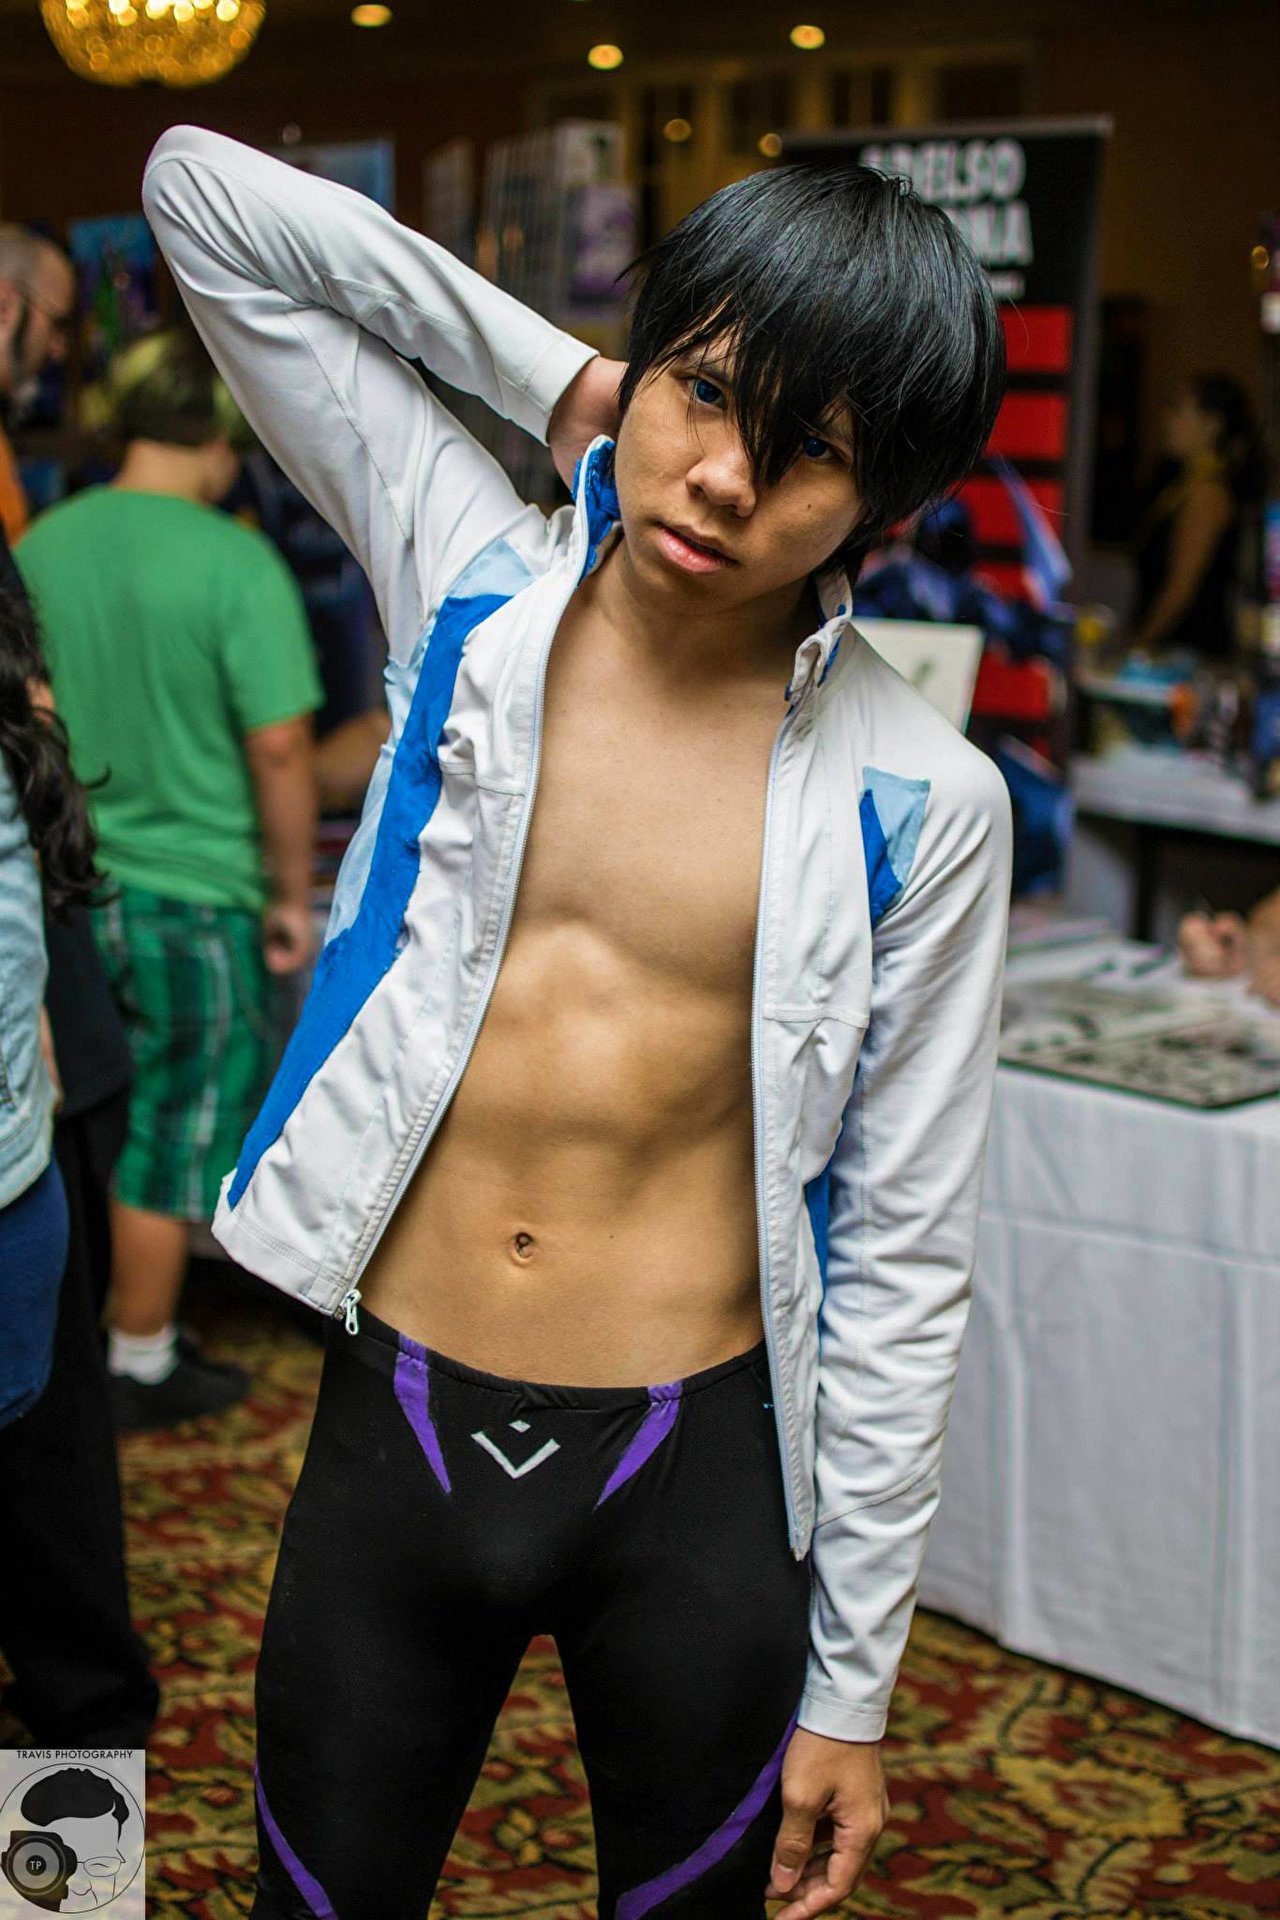 Cospix.net photo featuring Duy Truong Cosplay